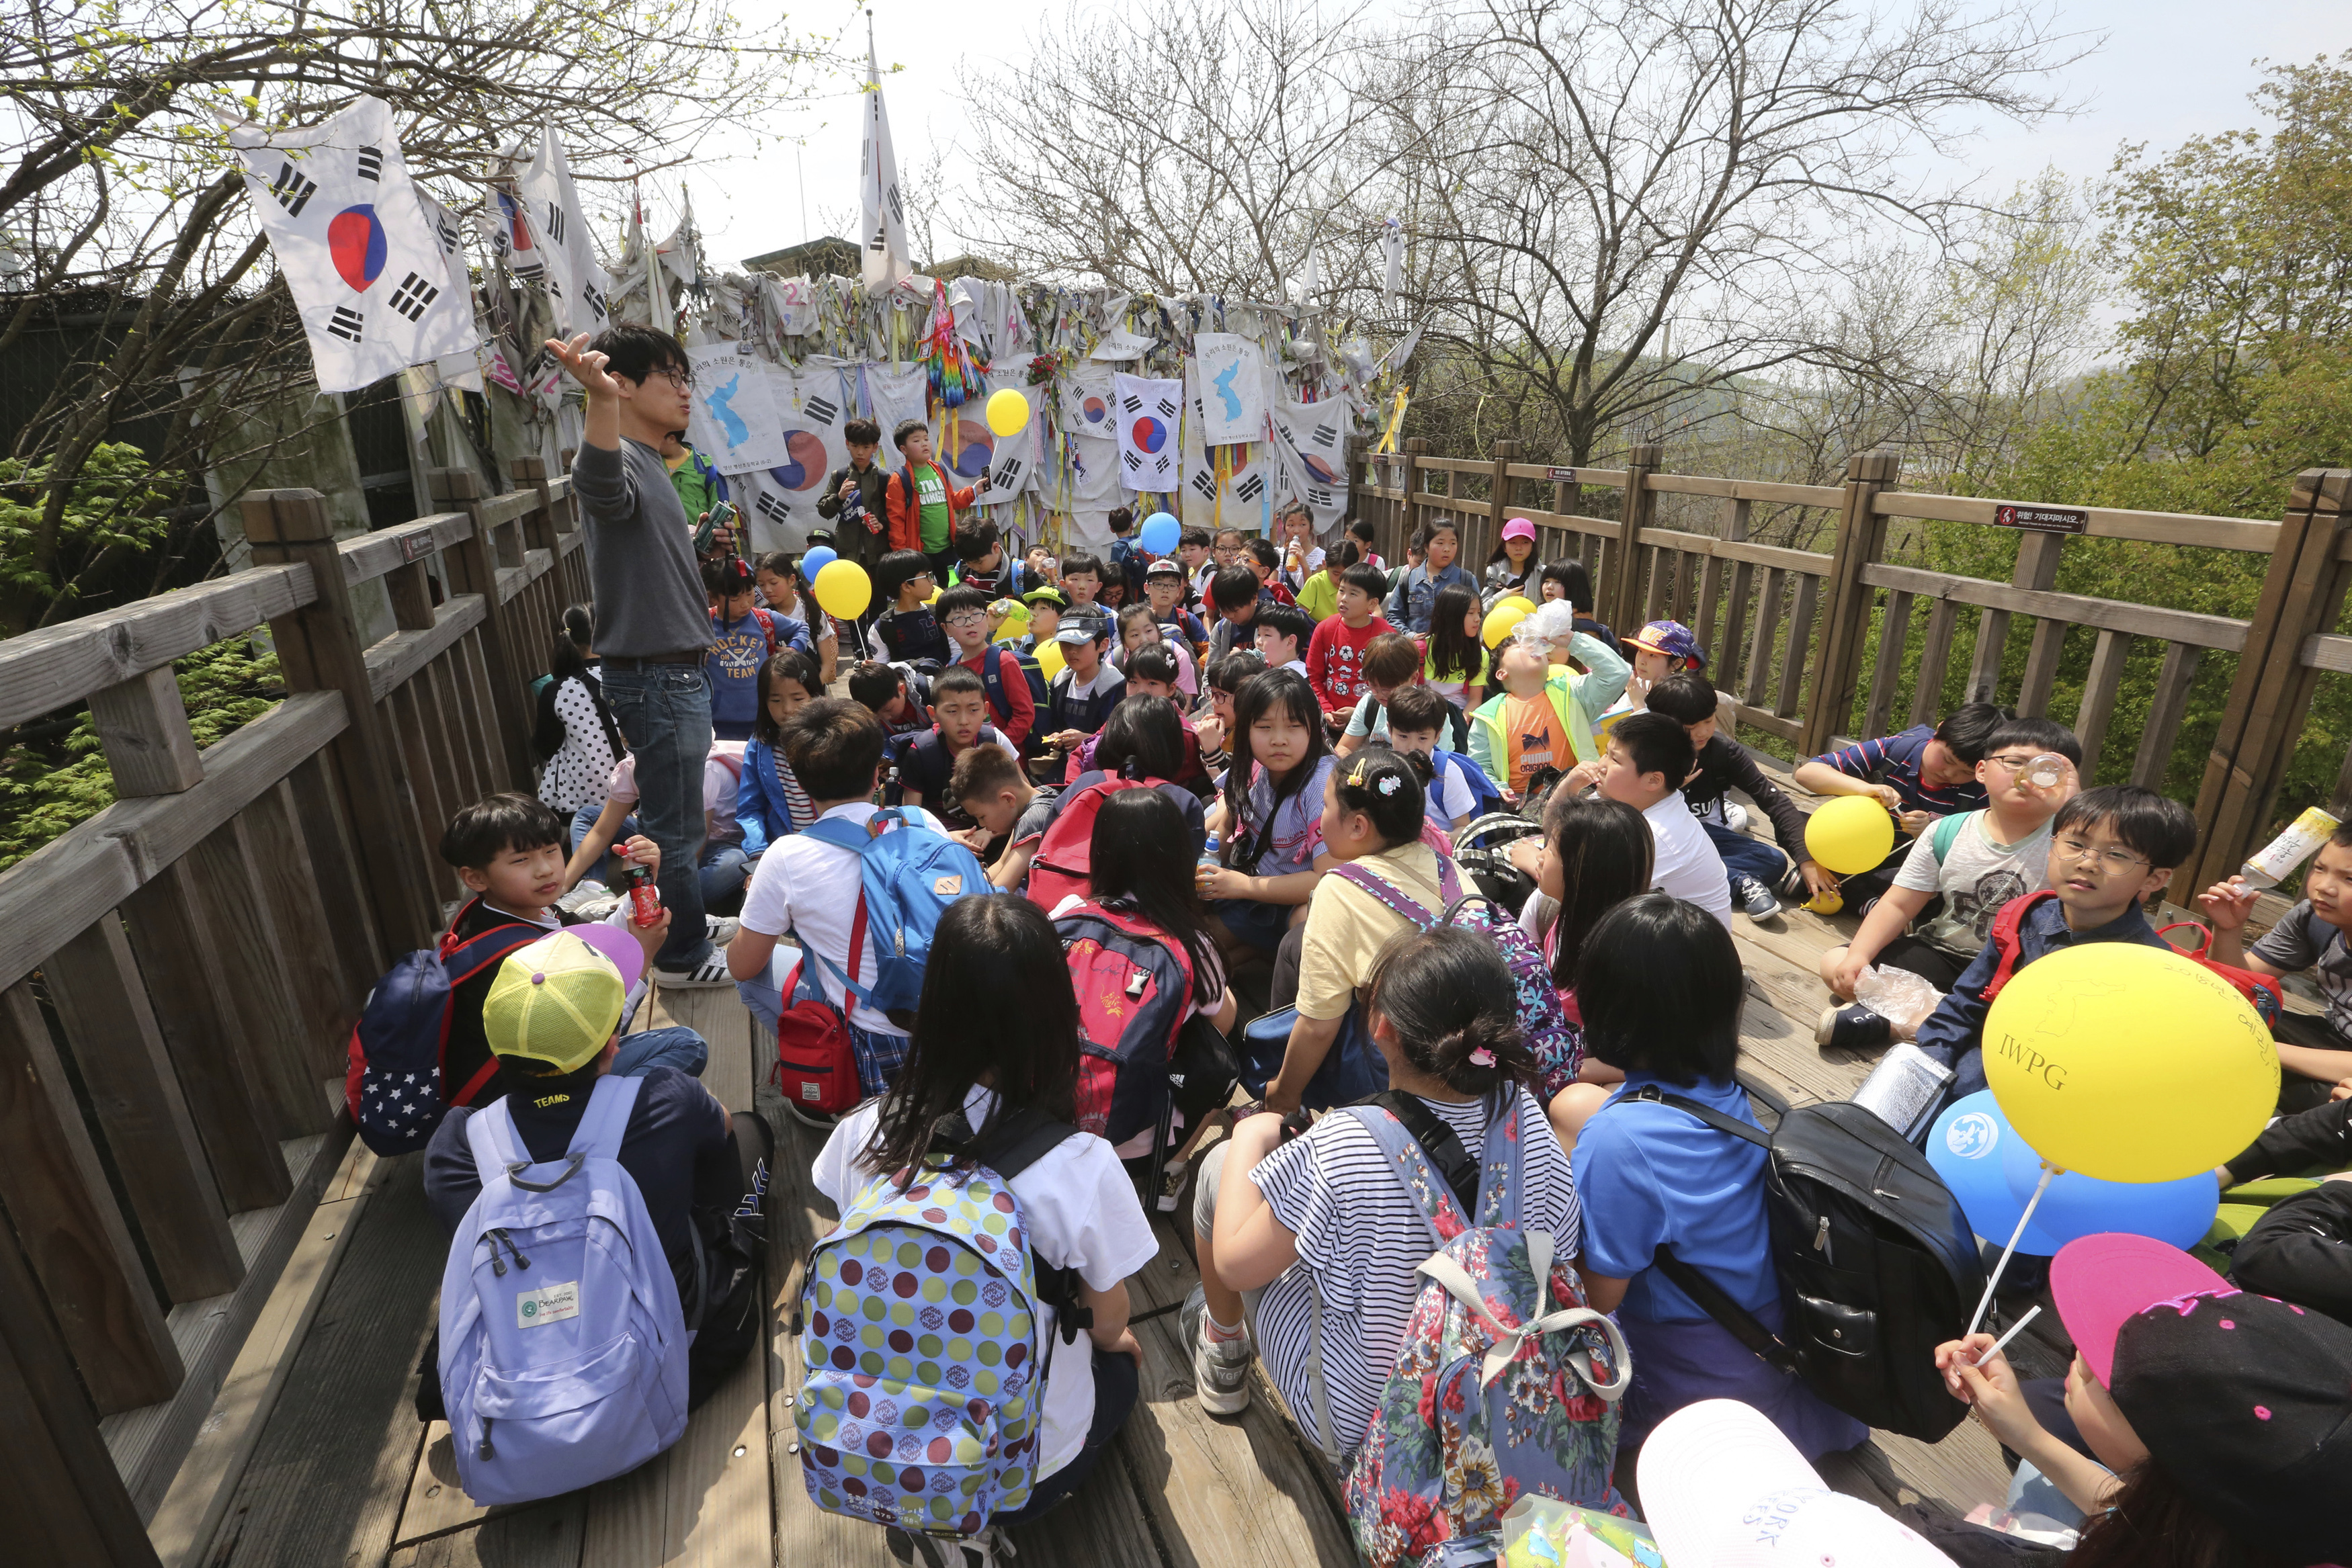 An elementary school teacher, left top, explains about the upcoming summit between South and North Korea to his students in front of a barbed wire fence with messages wishing for the reunification of the two Koreas at the Imjingak Pavilion in Paju, South Korea, near the border with North Korea, Thursday, April 26, 2018. North Korean leader Kim Jong Un and South Korean President Moon-Jae-in will plant a commemorative tree and inspect an honor guard together after Kim walks across the border Friday for their historic summit, Seoul officials said Thursday. (AP Photo/Ahn Young-joon)